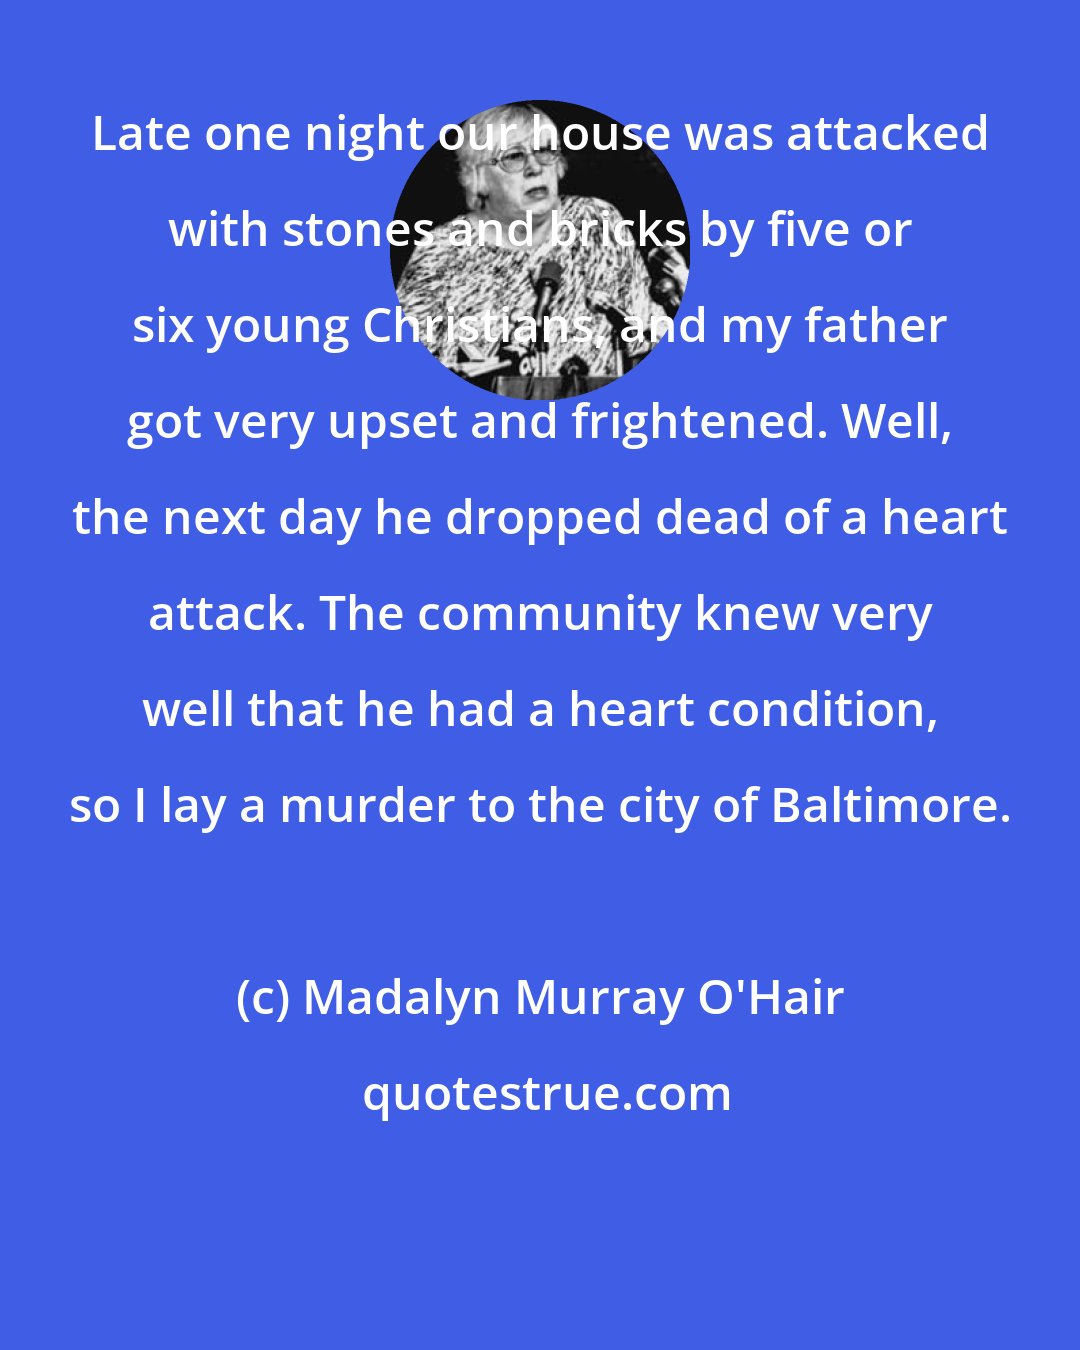 Madalyn Murray O'Hair: Late one night our house was attacked with stones and bricks by five or six young Christians, and my father got very upset and frightened. Well, the next day he dropped dead of a heart attack. The community knew very well that he had a heart condition, so I lay a murder to the city of Baltimore.